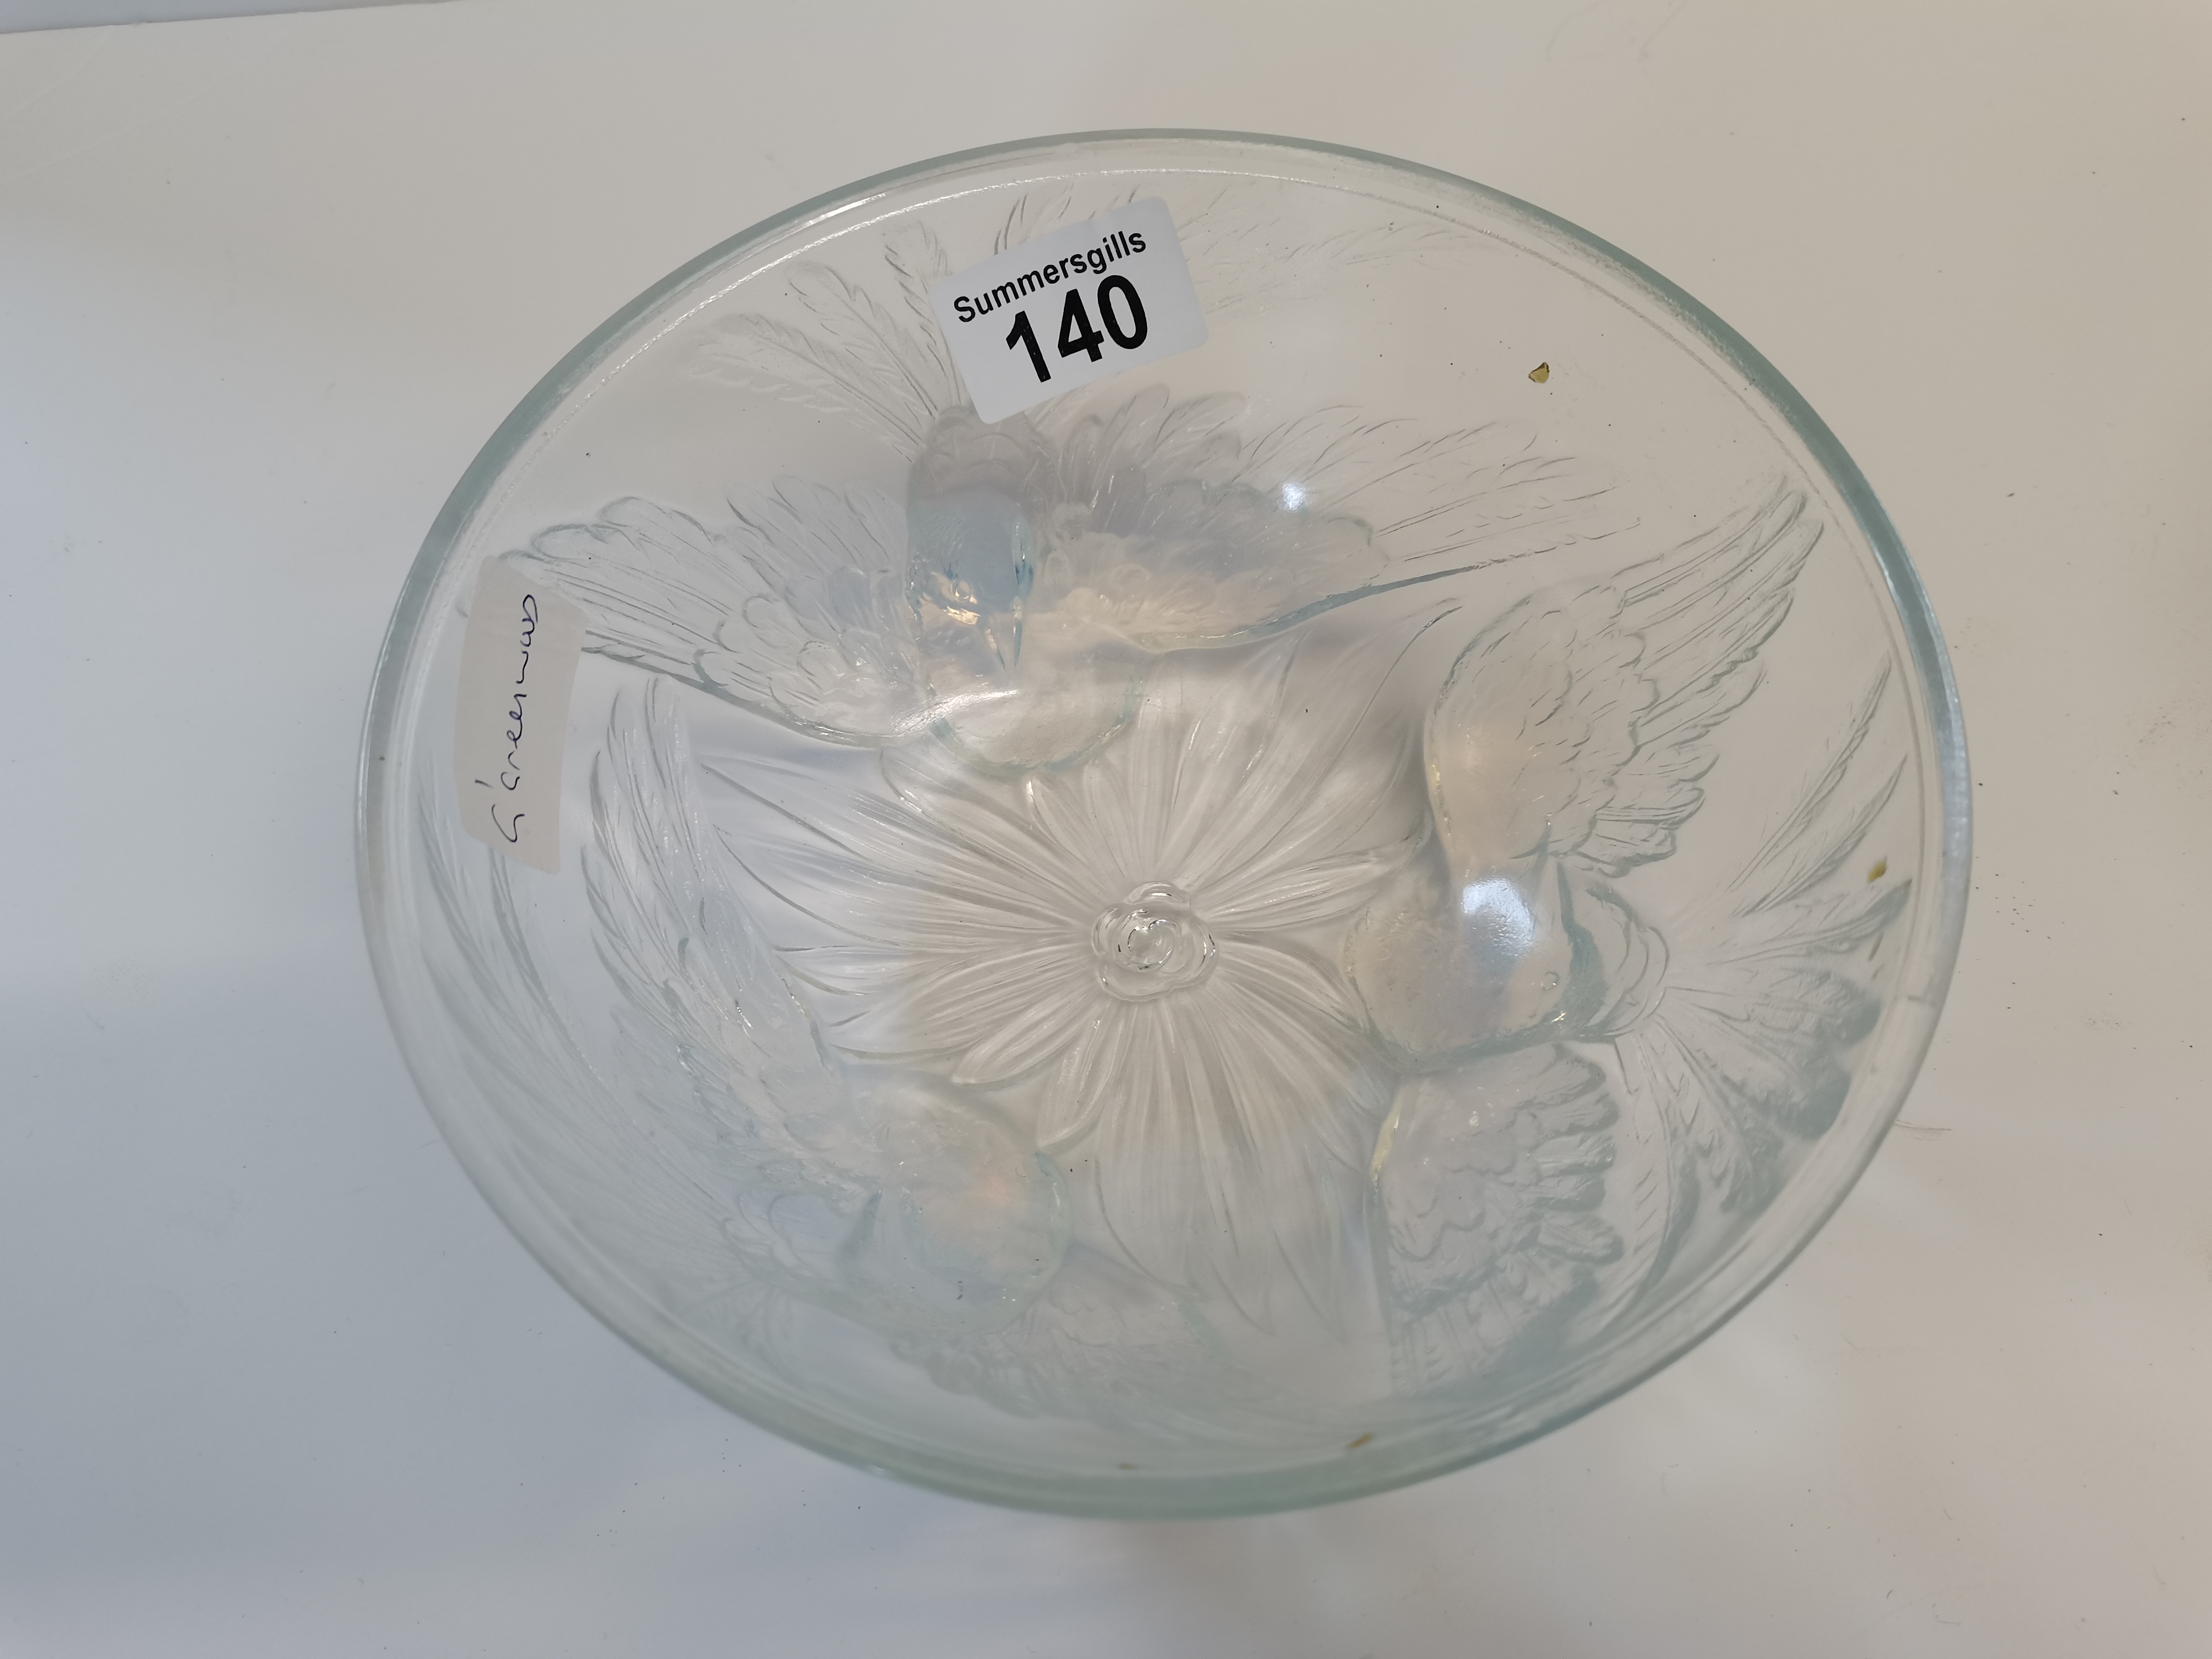 Lalique/Jobling Opalescent bowl - excellent condition - Image 3 of 6